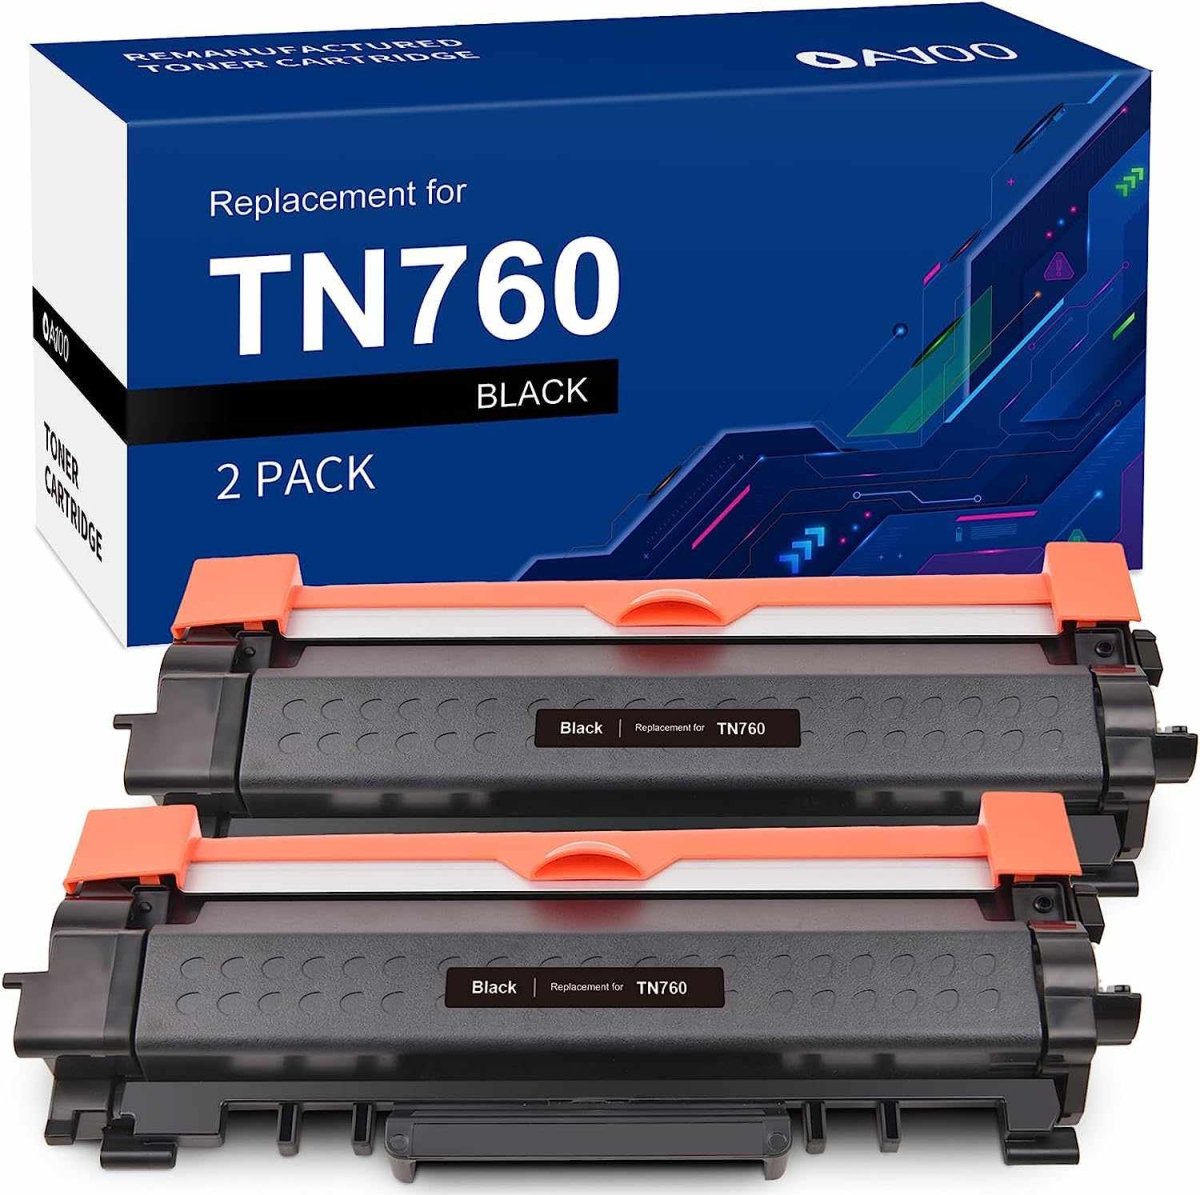 pack compatible Brother TN241/245 - Les encriers.com